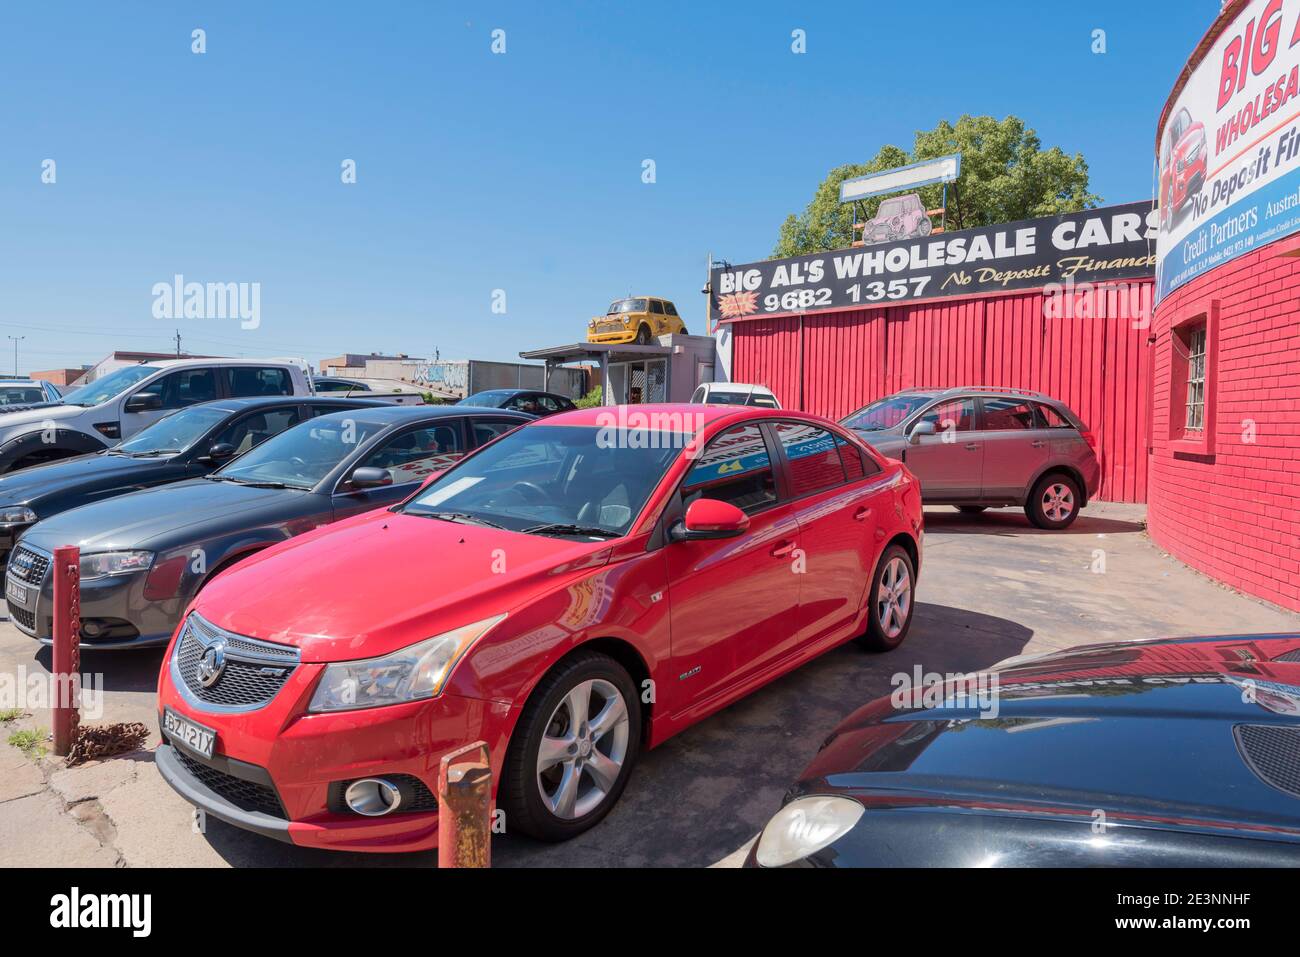 A small, independent used car dealership, Big Al's, on Parramatta Road  (Great Western Highway) in western Sydney, Australia Stock Photo - Alamy